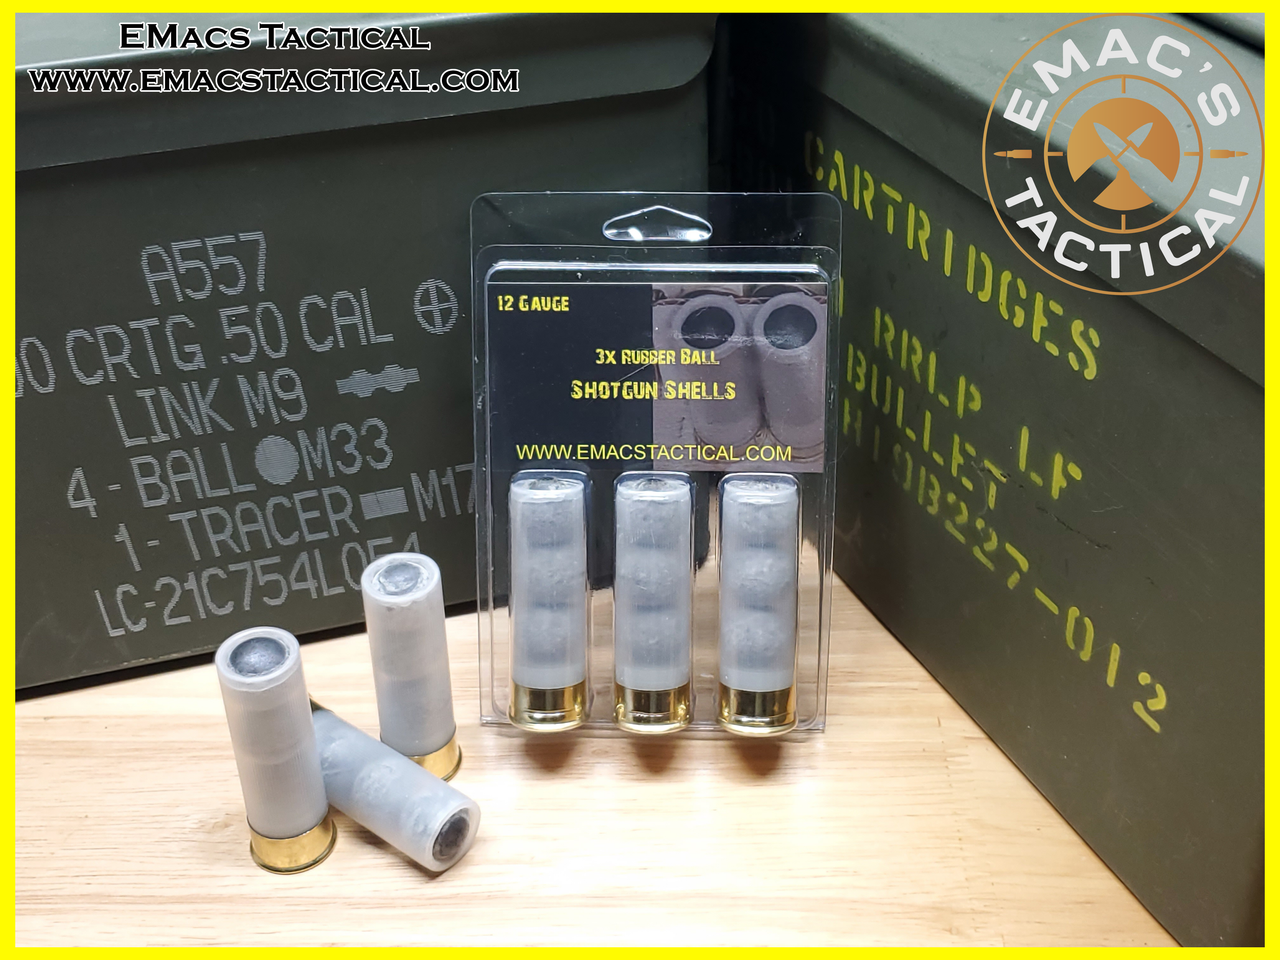 12 Gauge 3 Rubber Ball Less than Lethal Specialty Shotgun Shell Pack